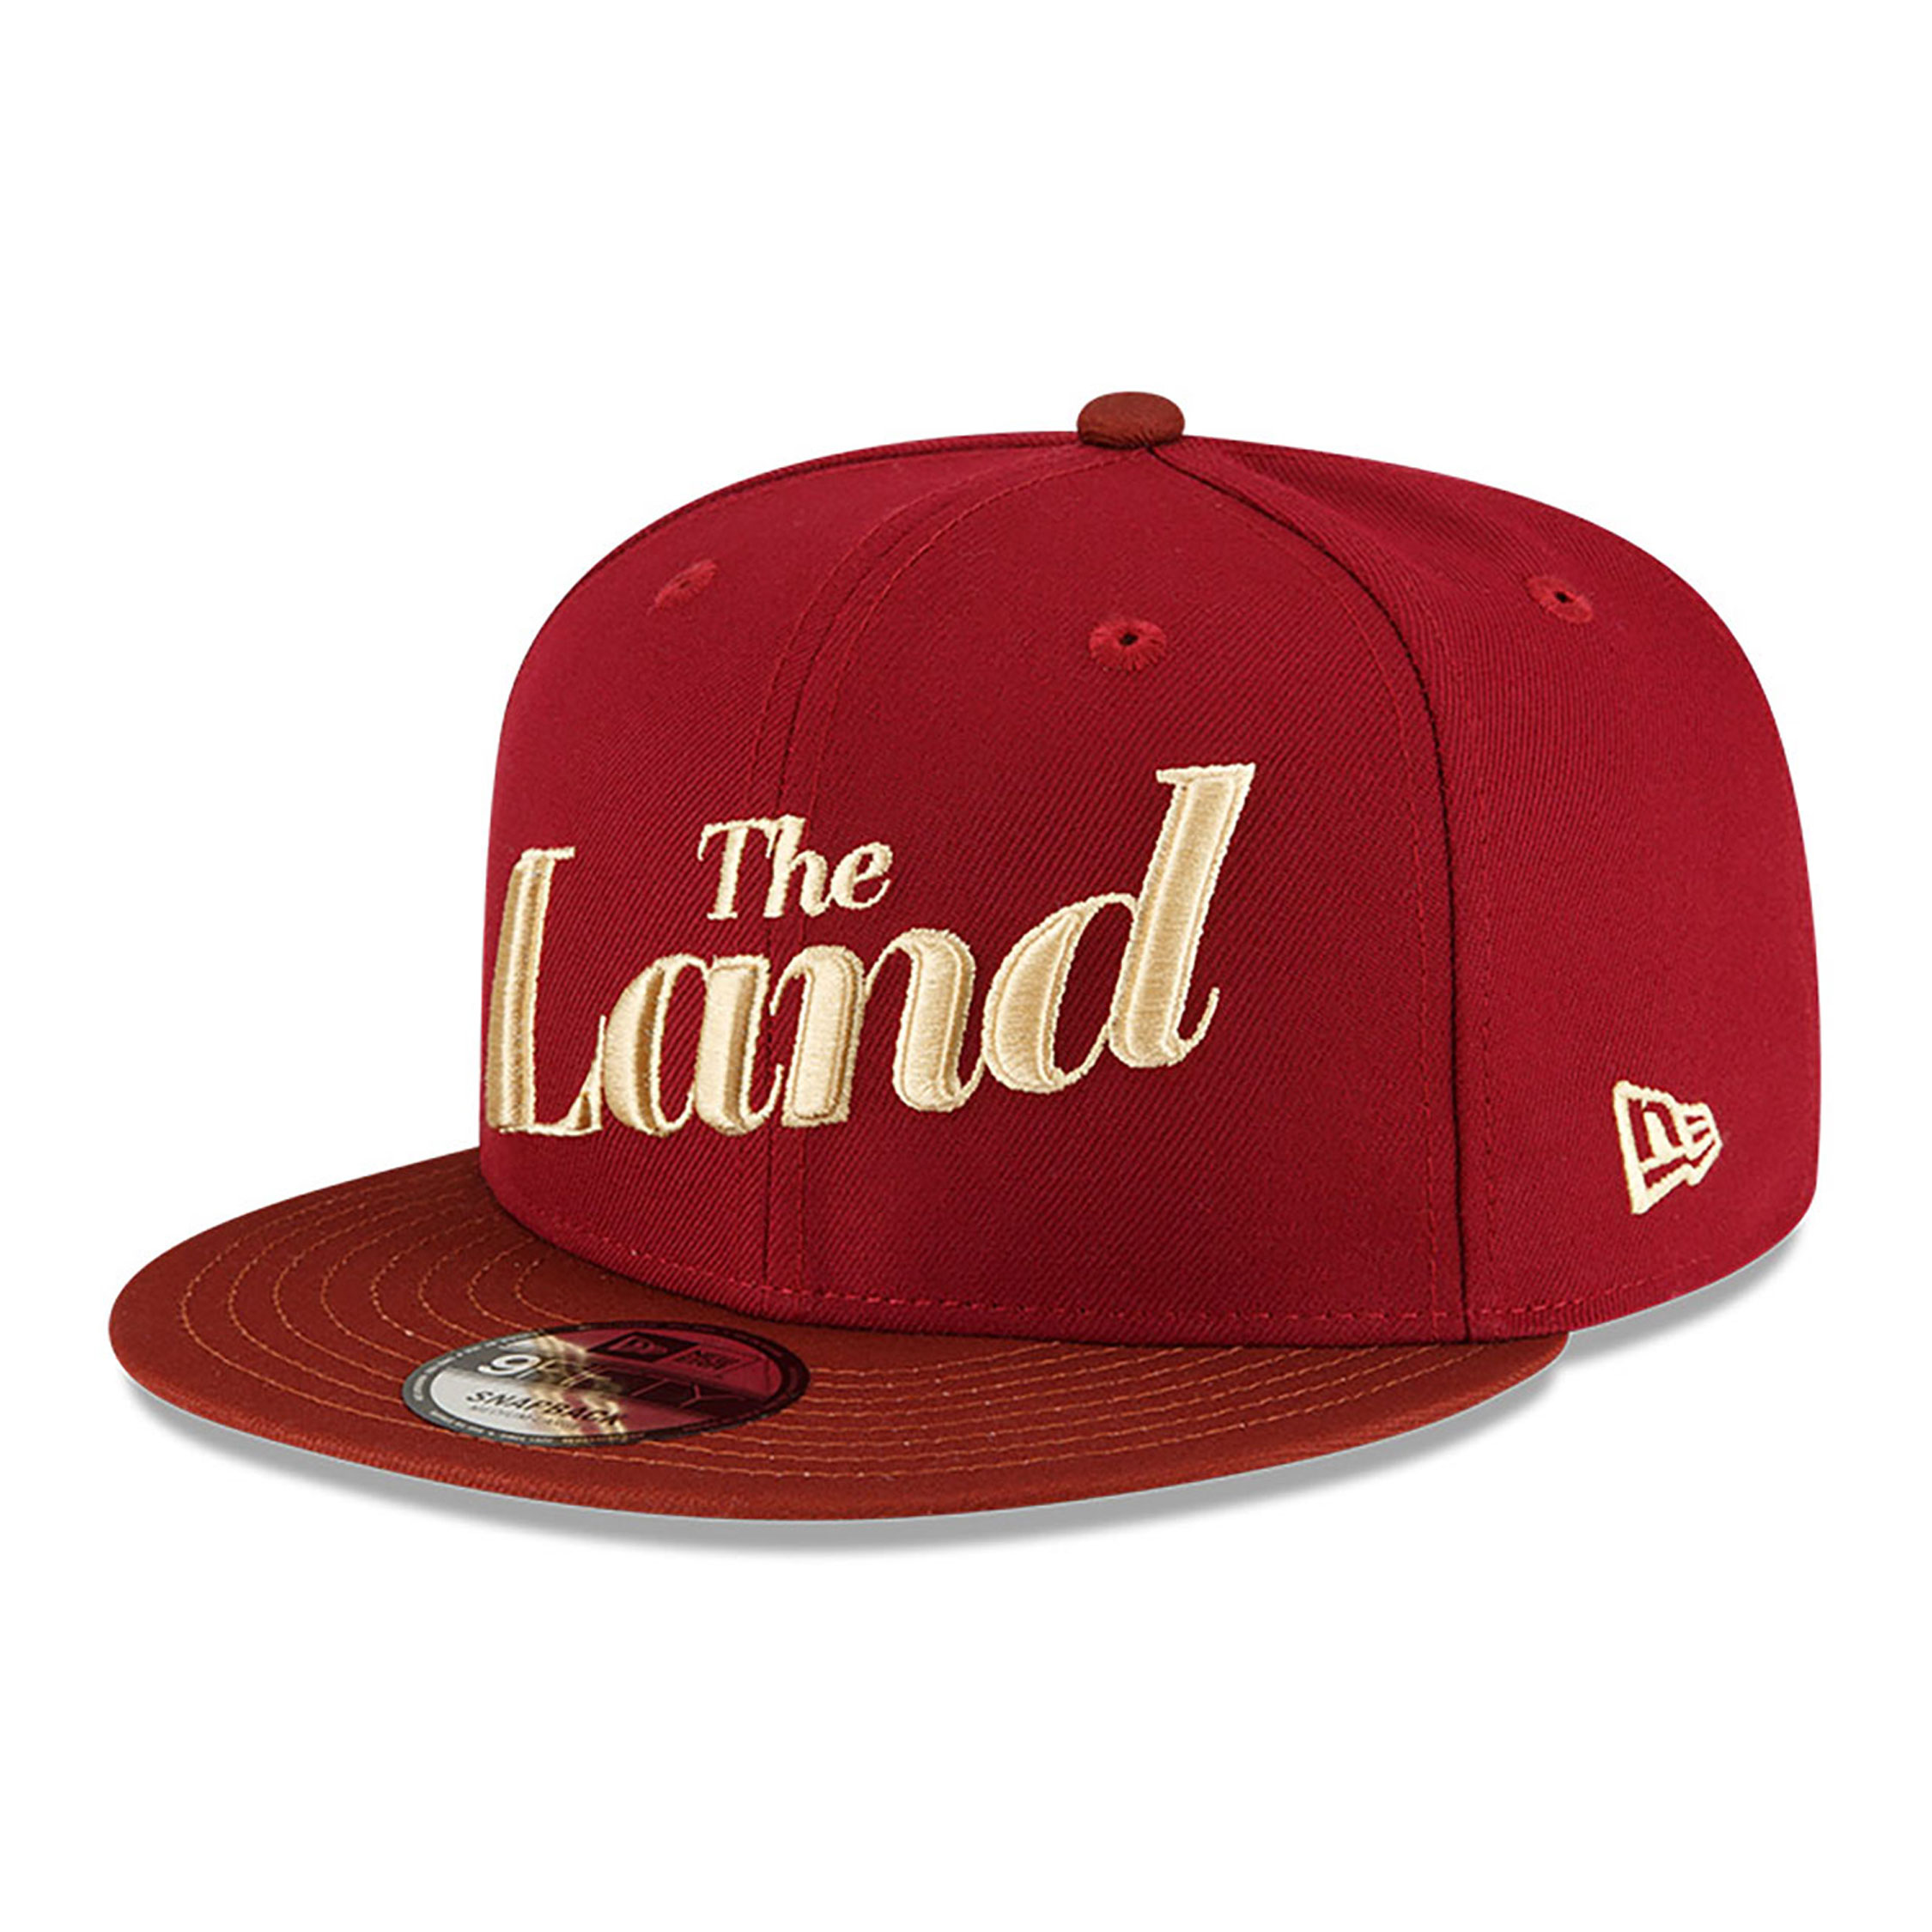 Cleveland Cavaliers NBA City Edition Dark Red 9FIFTY Snapback Cap